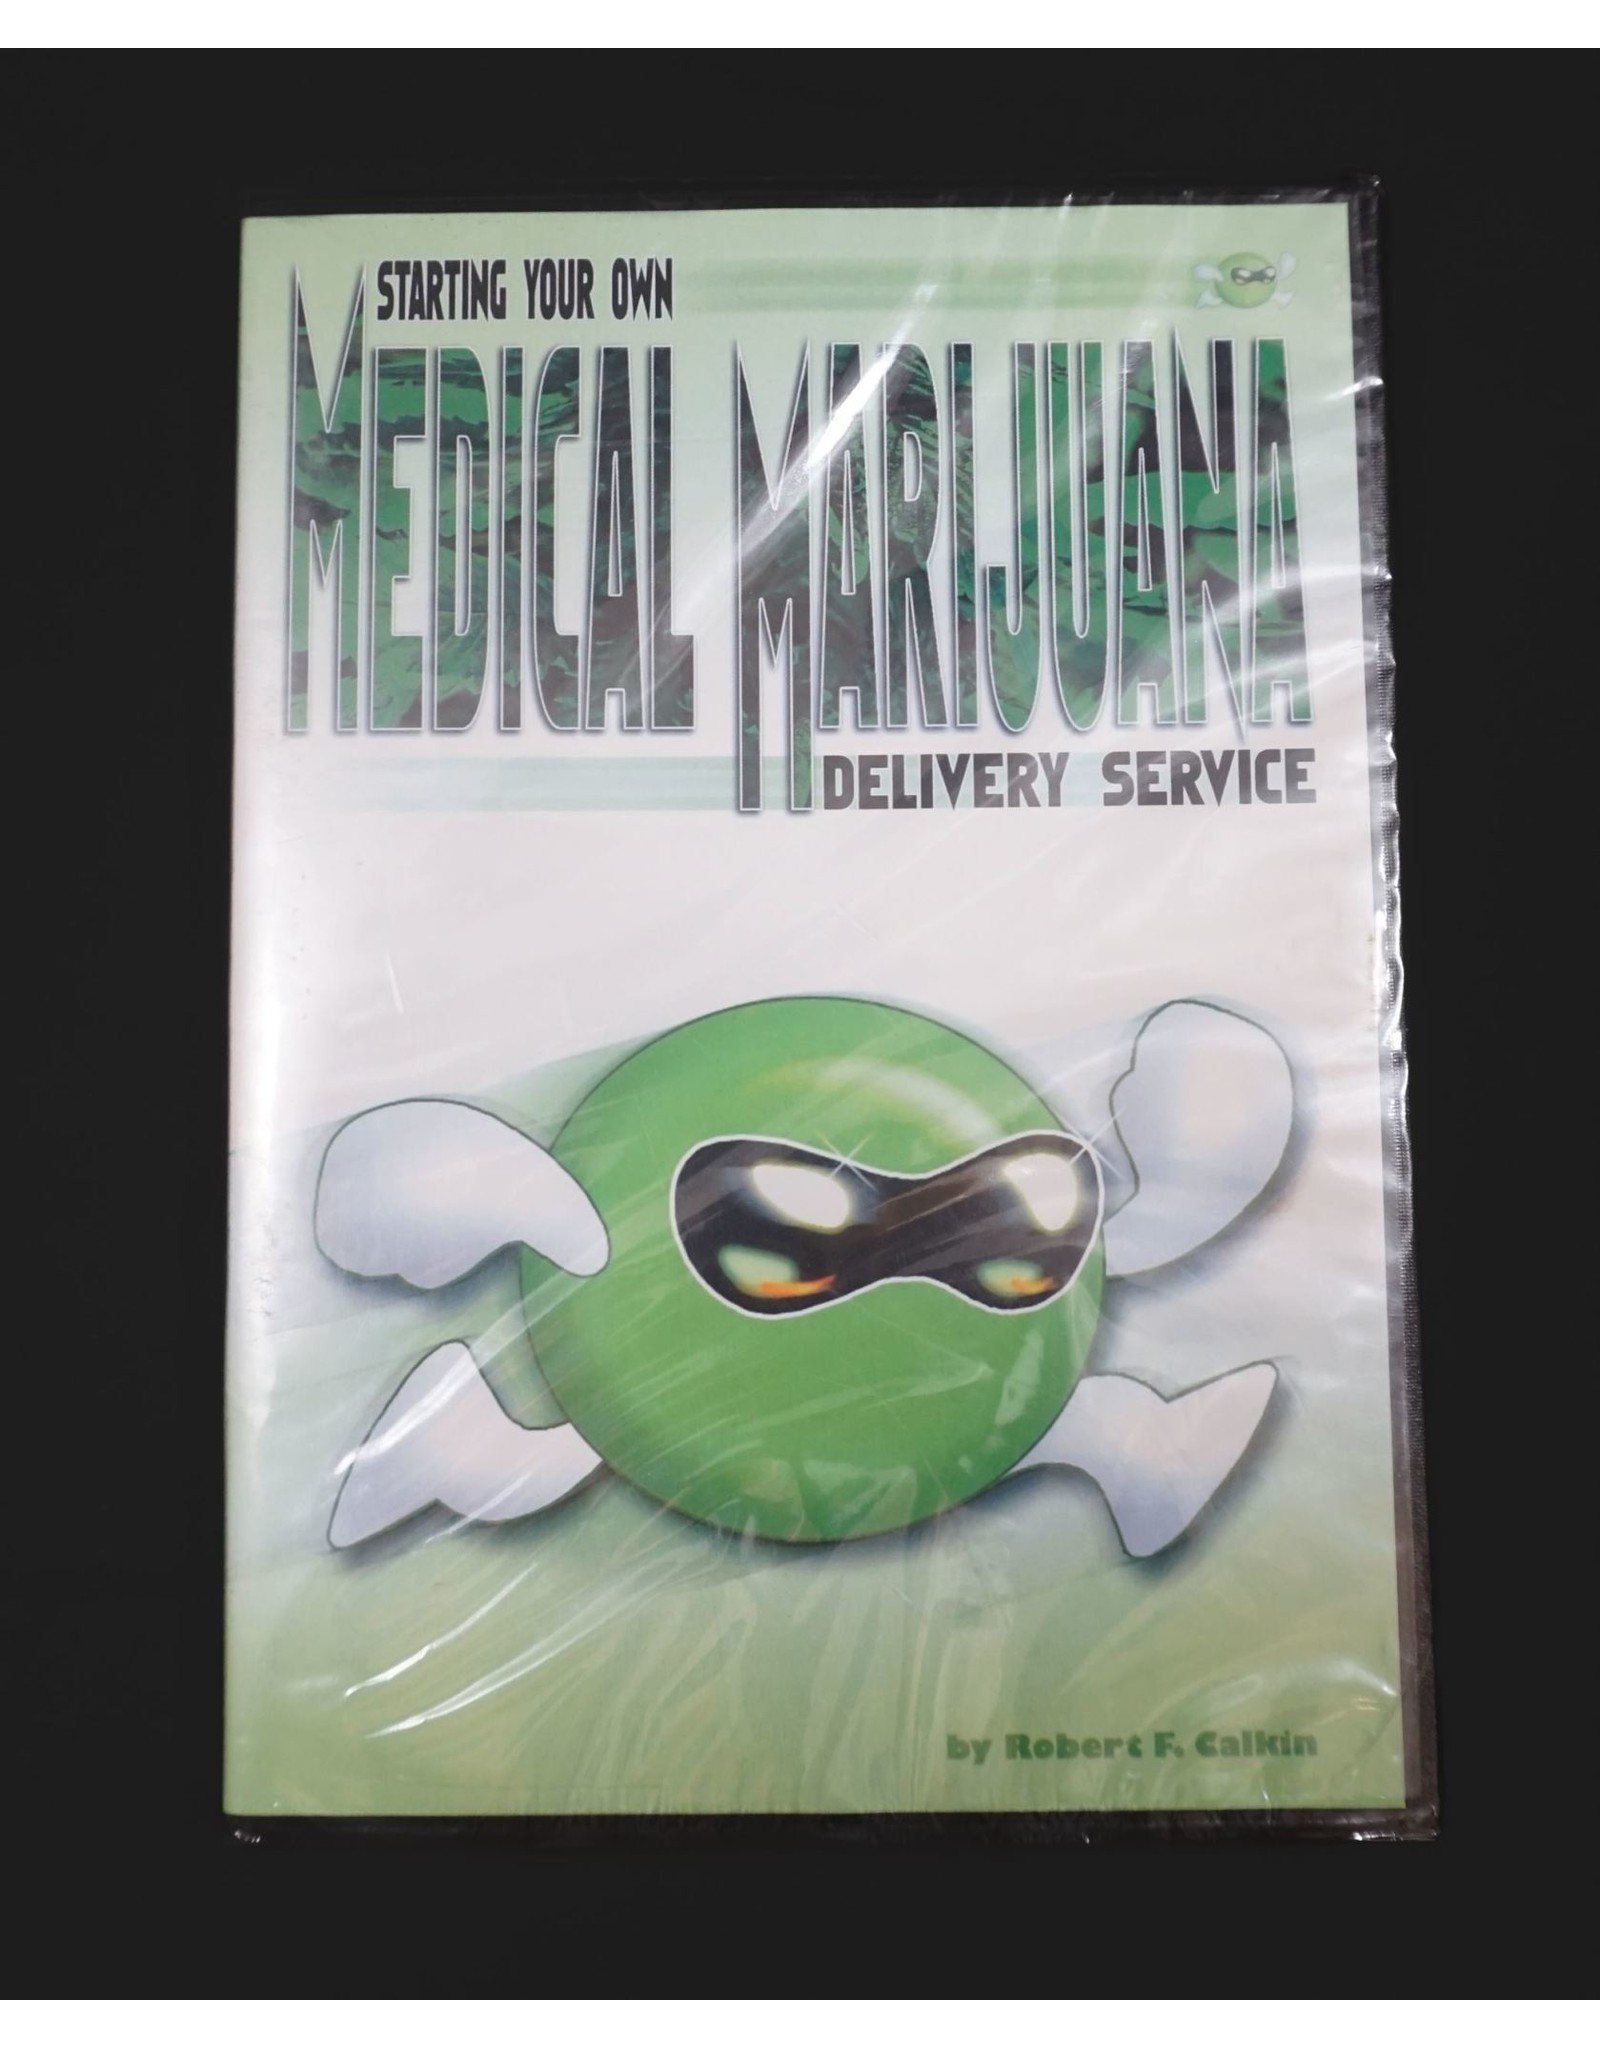 Starting your own Medical Marijuana Delivery Service